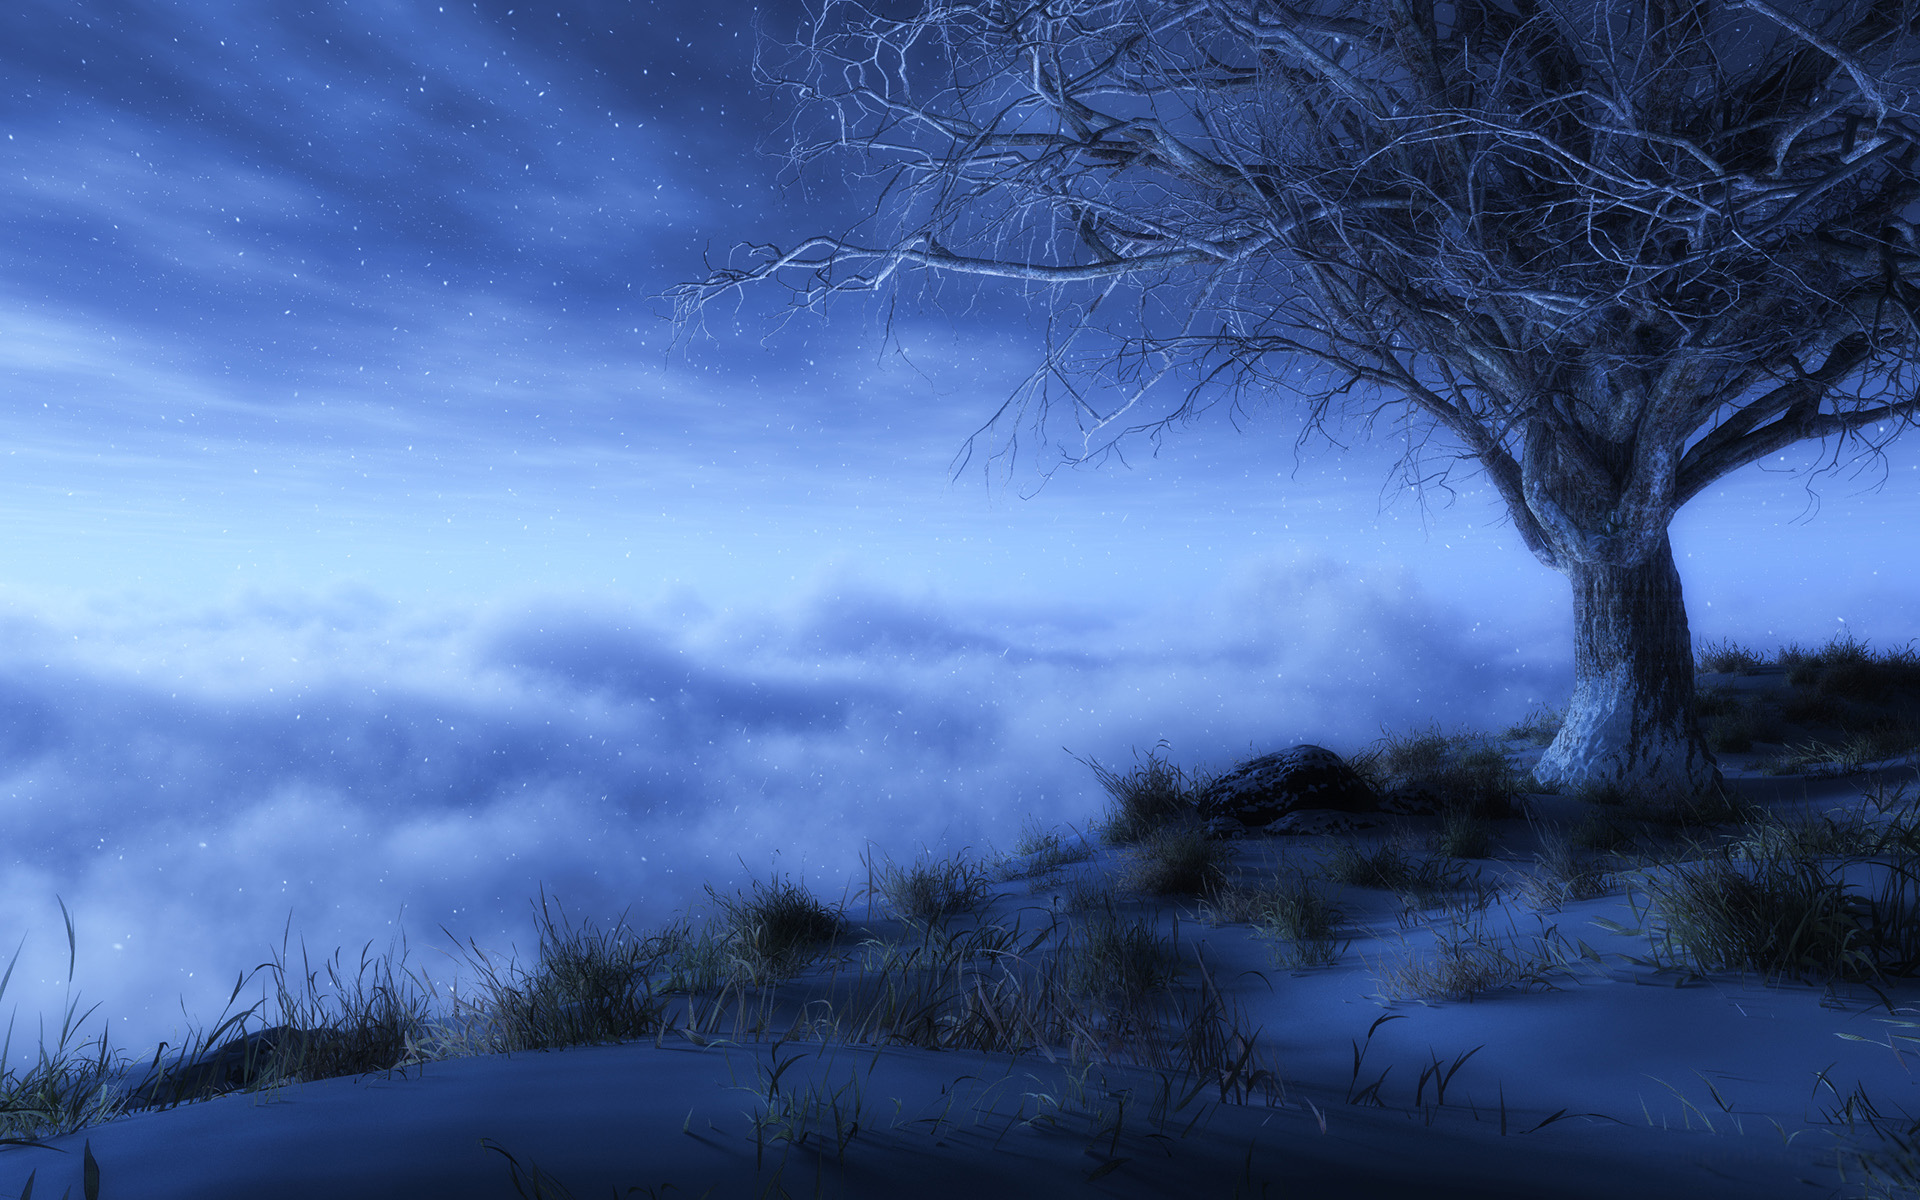 android artistic, fantasy, sky, cloud, stars, fog, lonely tree, tree